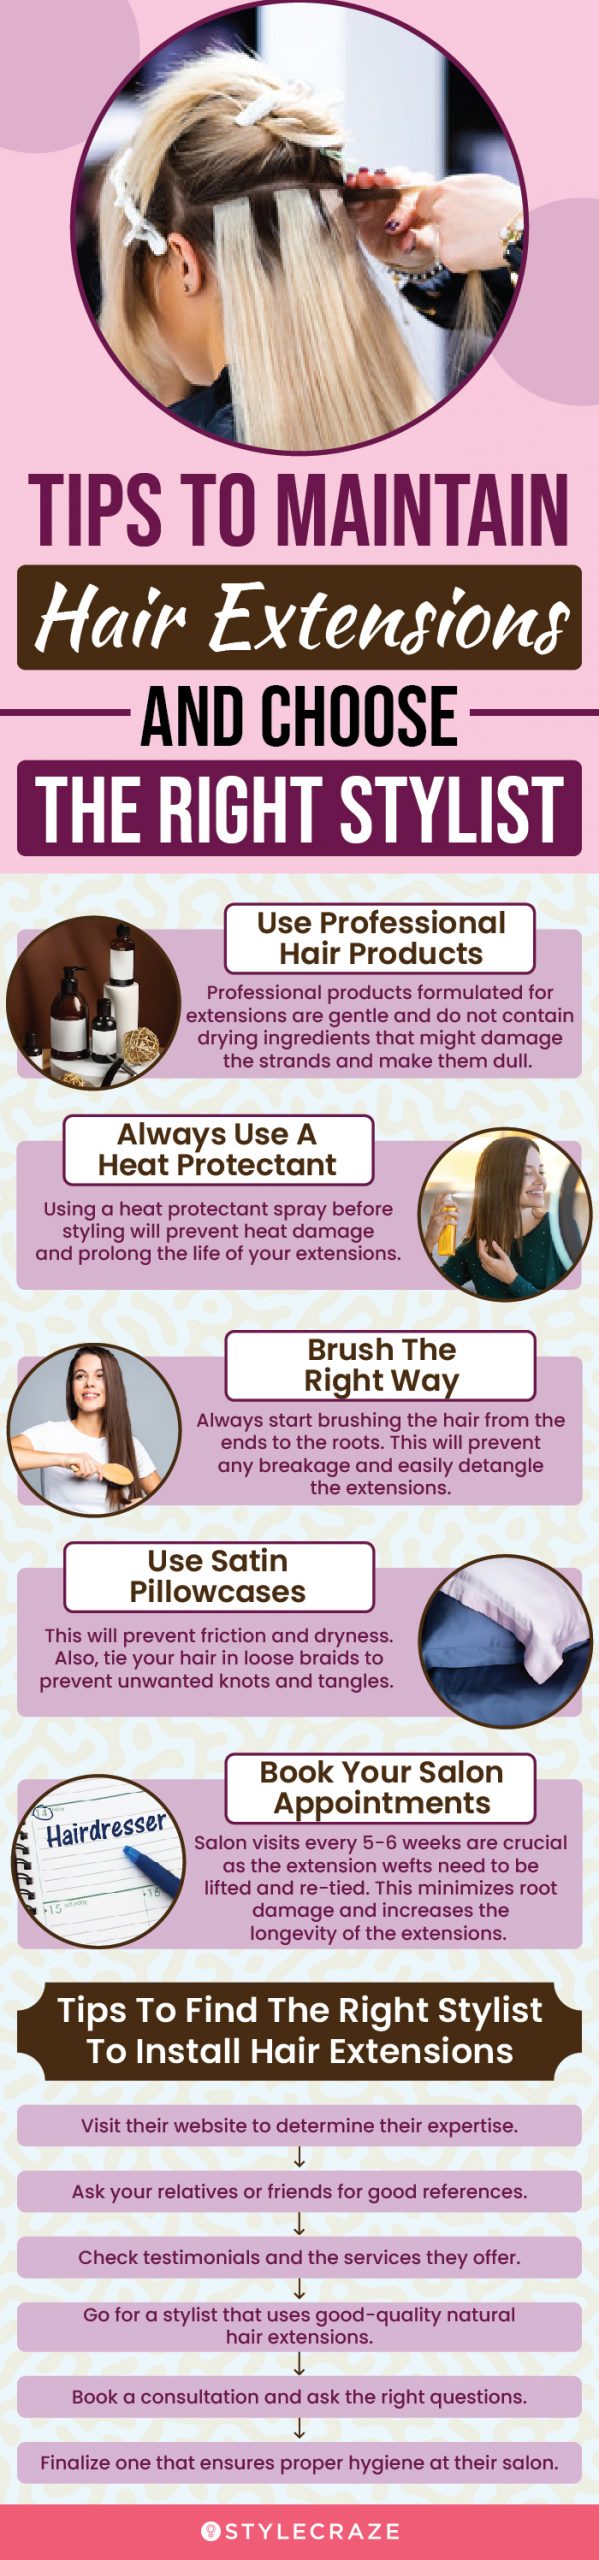 tips to maintain hair extensions and choose the right stylist(infographic)